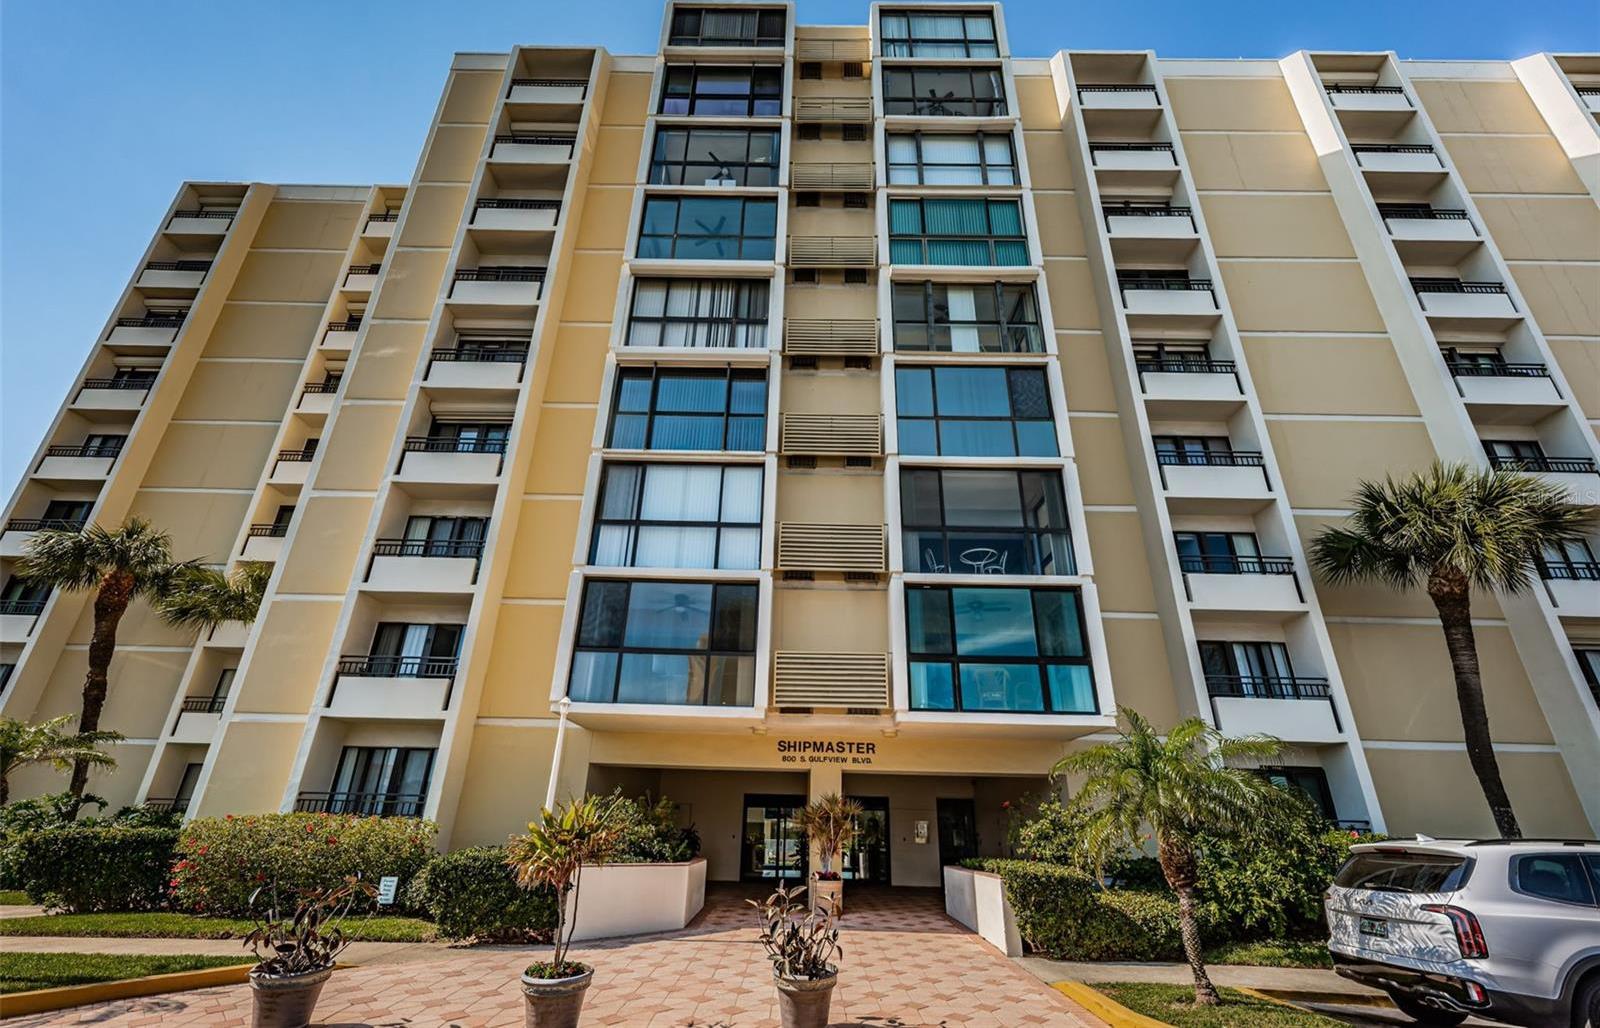 Photo one of 800 S Gulfview Blvd # 404 Clearwater FL 33767 | MLS U8229727